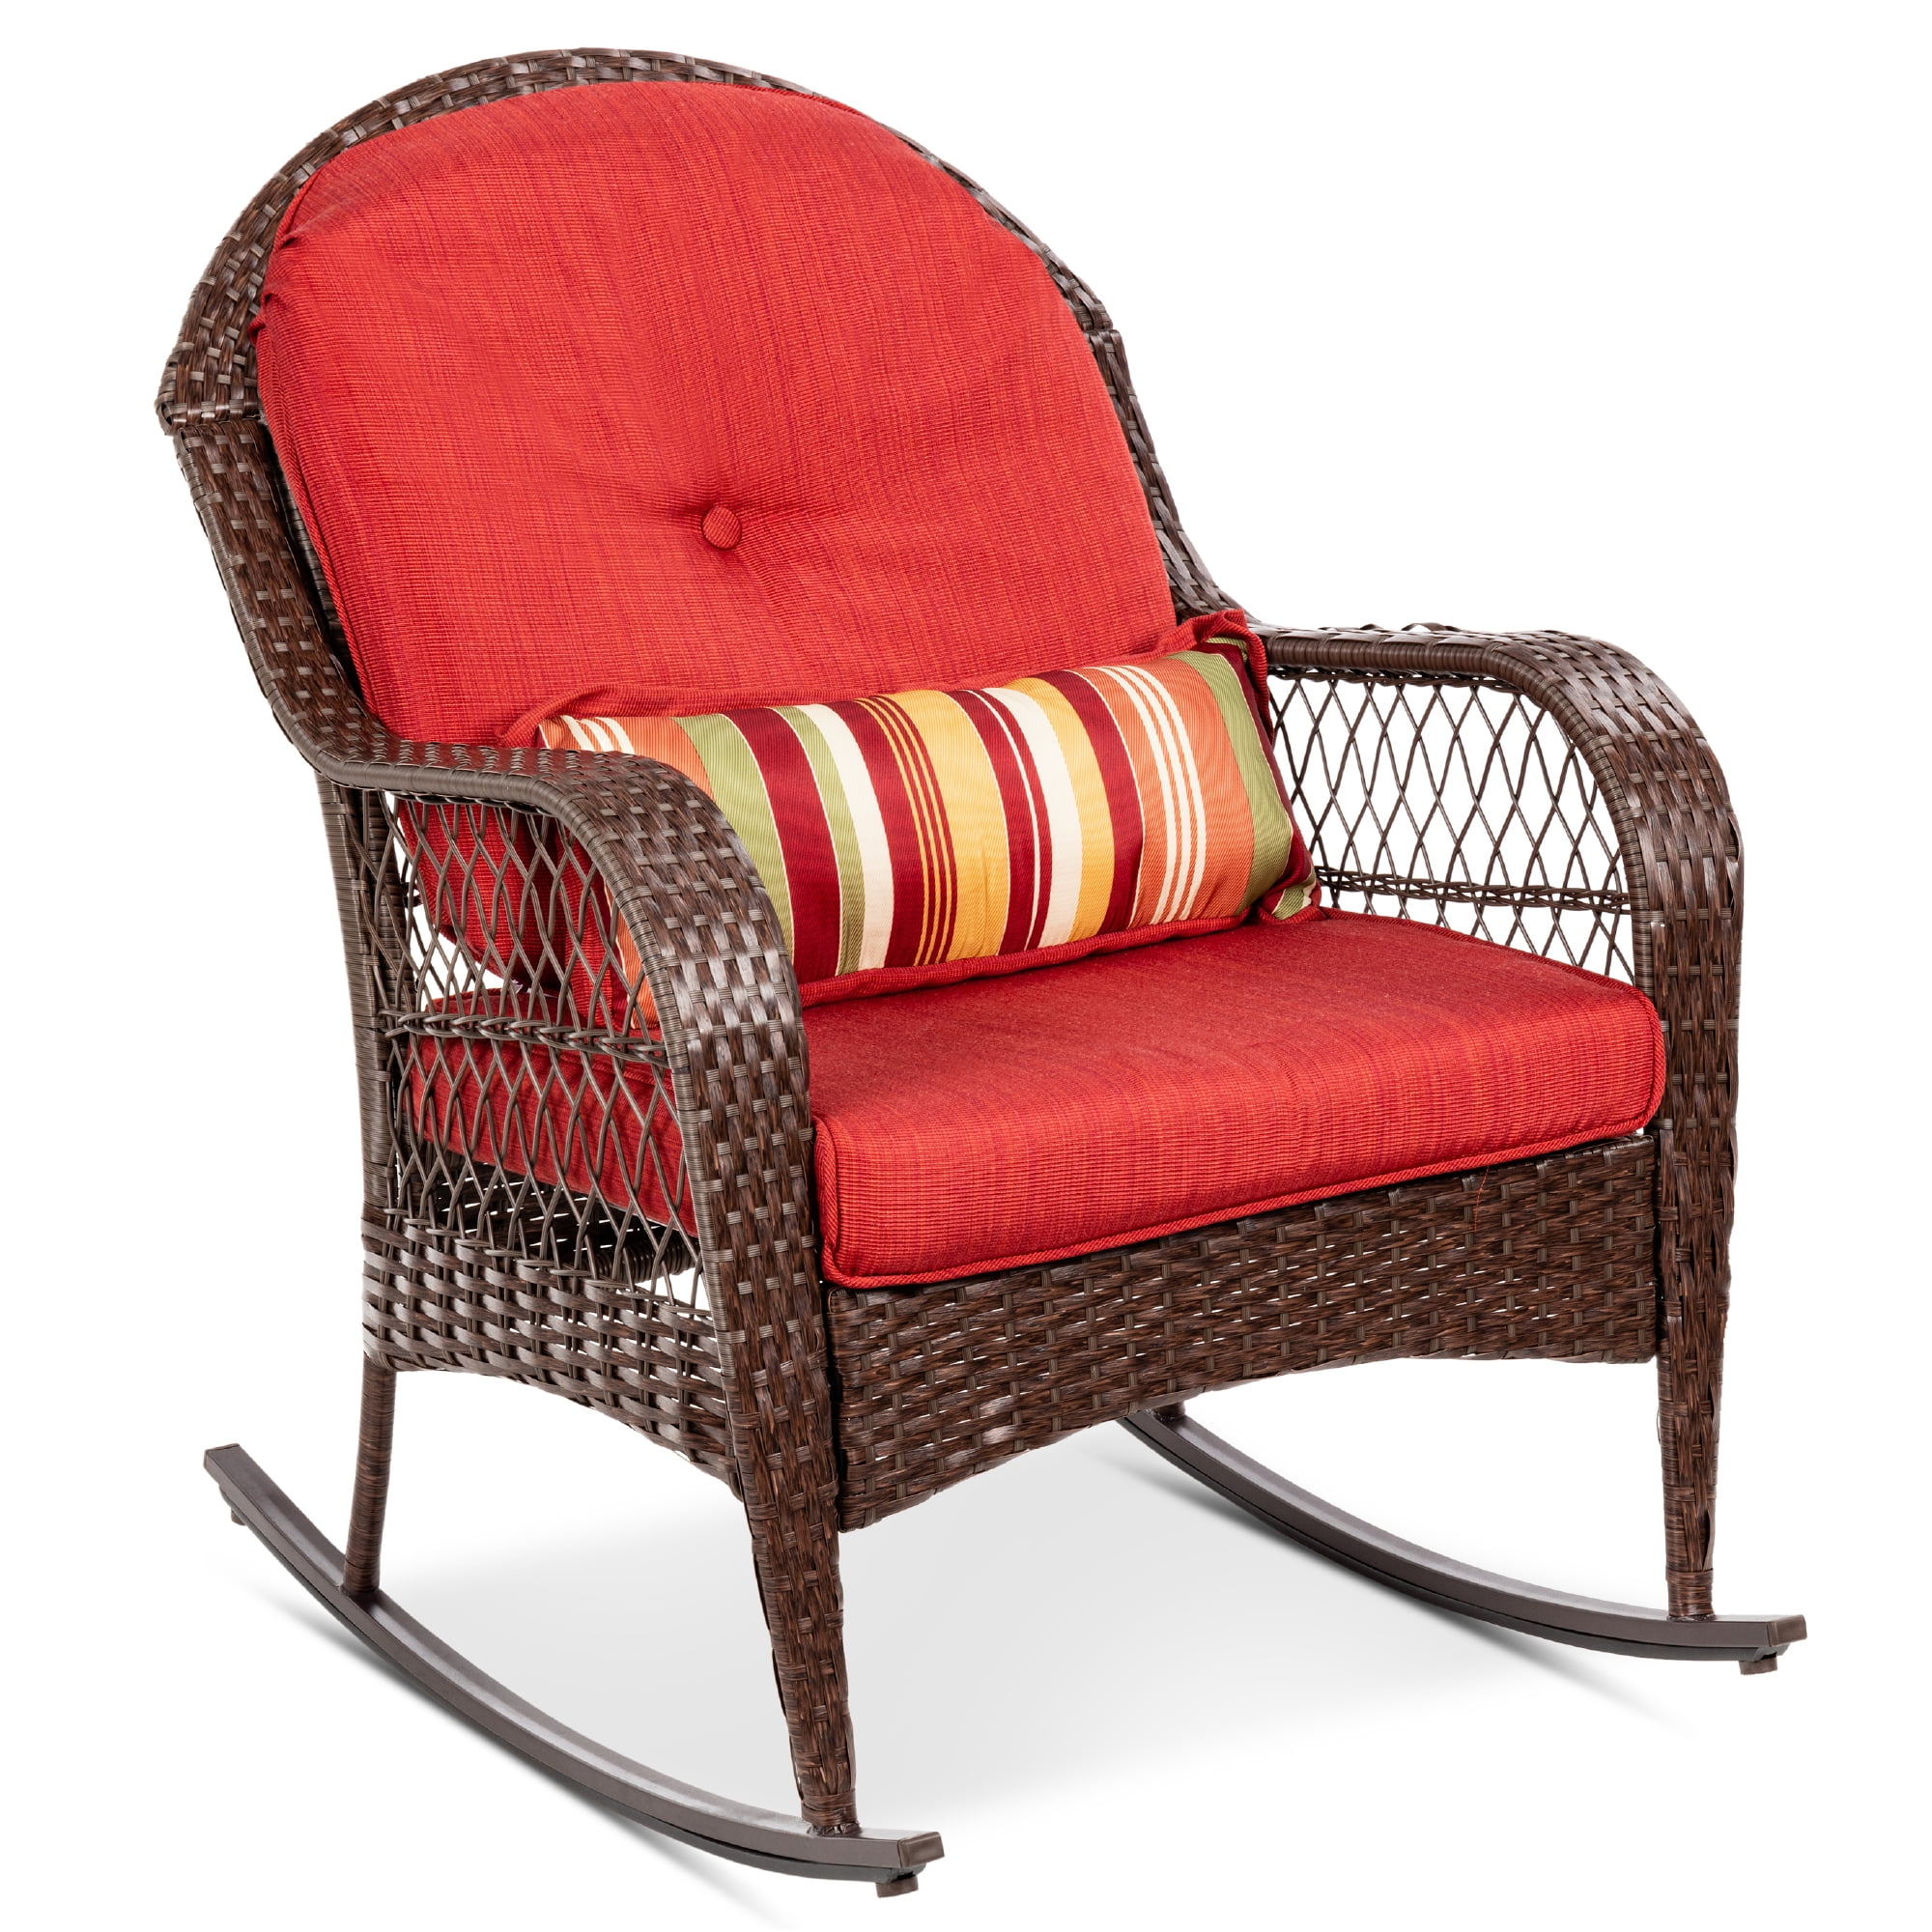 Best Choice Products Outdoor Wicker Rocking Chair for Patio, Porch w